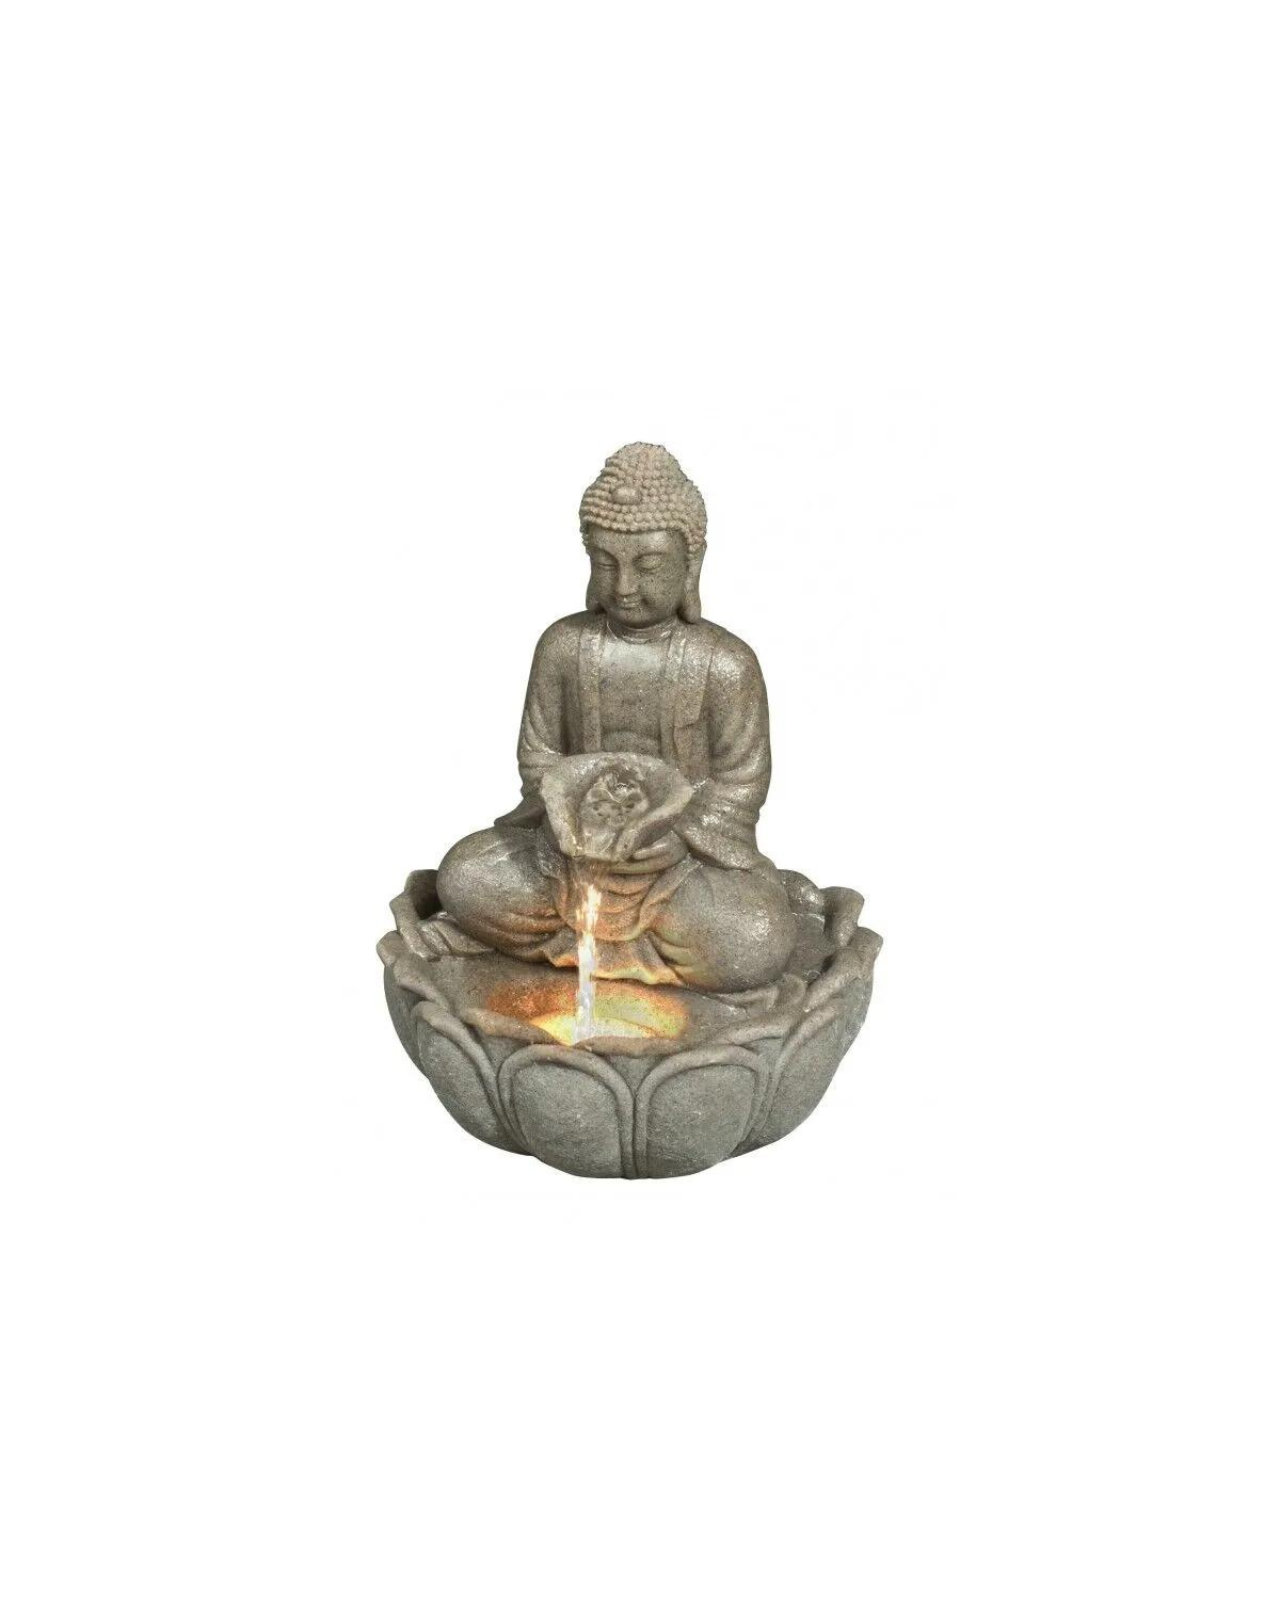 Vajra - Buddha Table Top Water feature 34cm